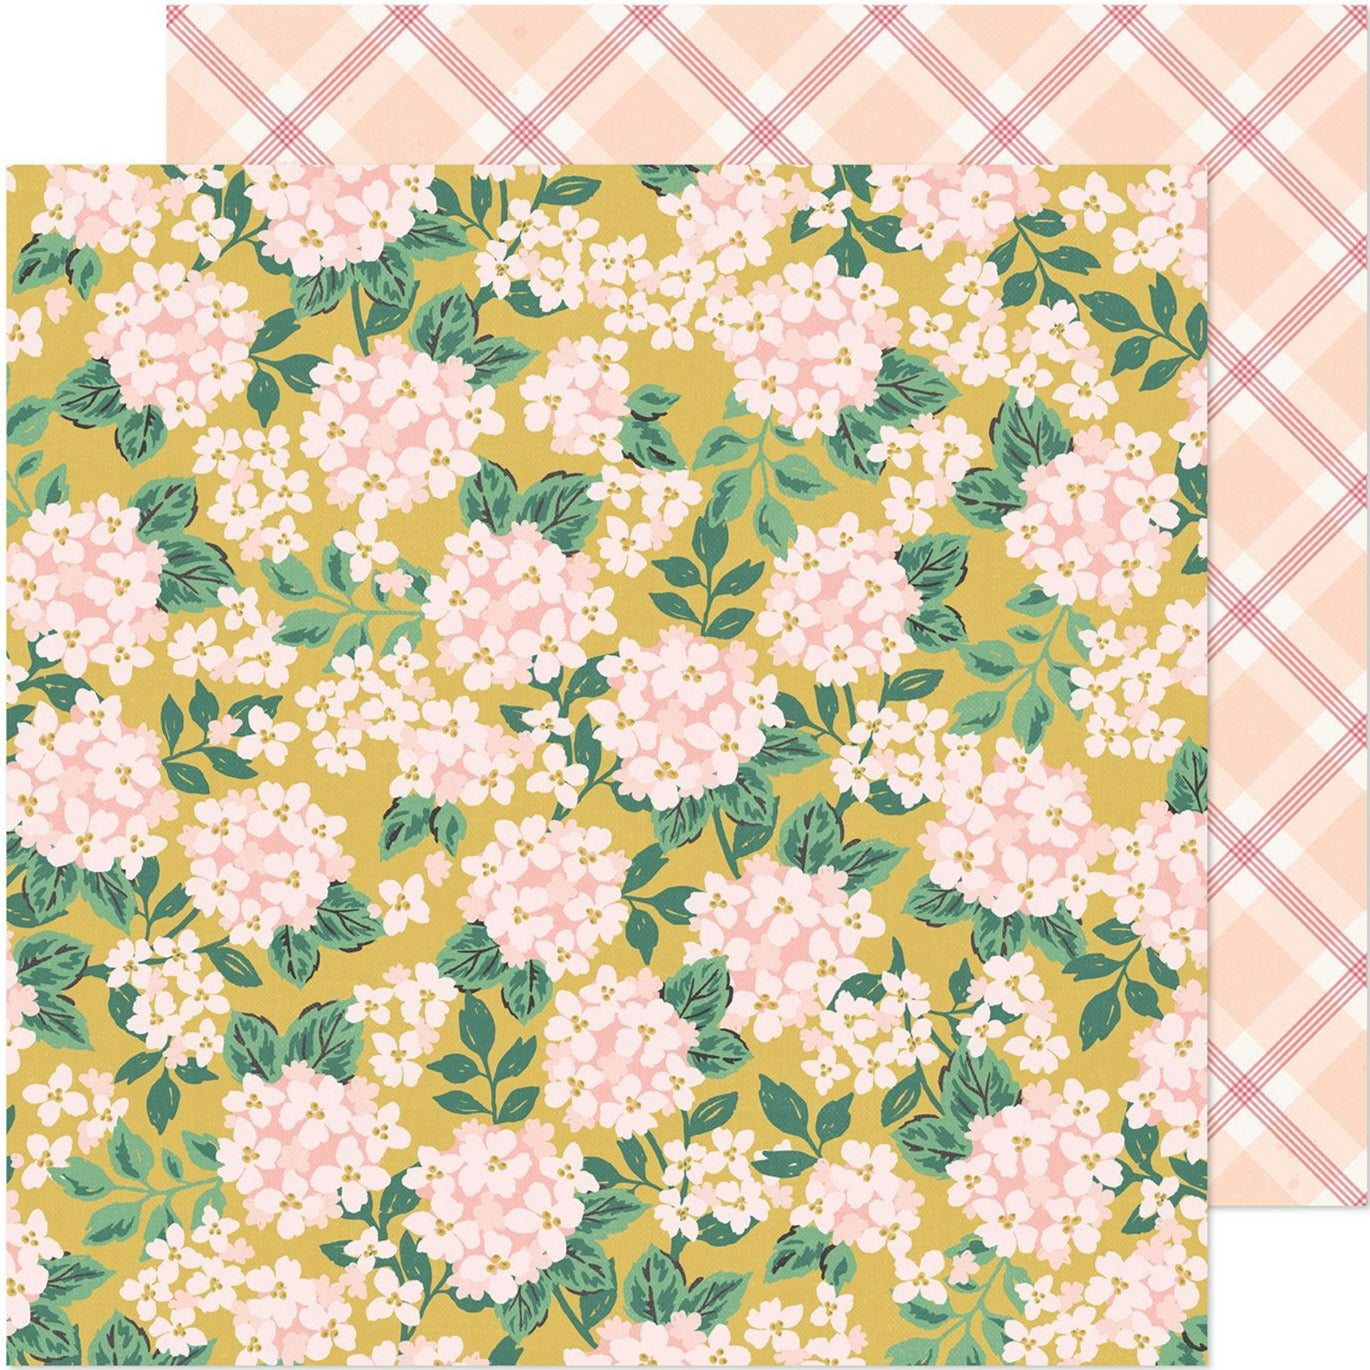 (Side A - pink hydrangea flowers with green leaves on a yellow background, Side B - pink plaid pattern)